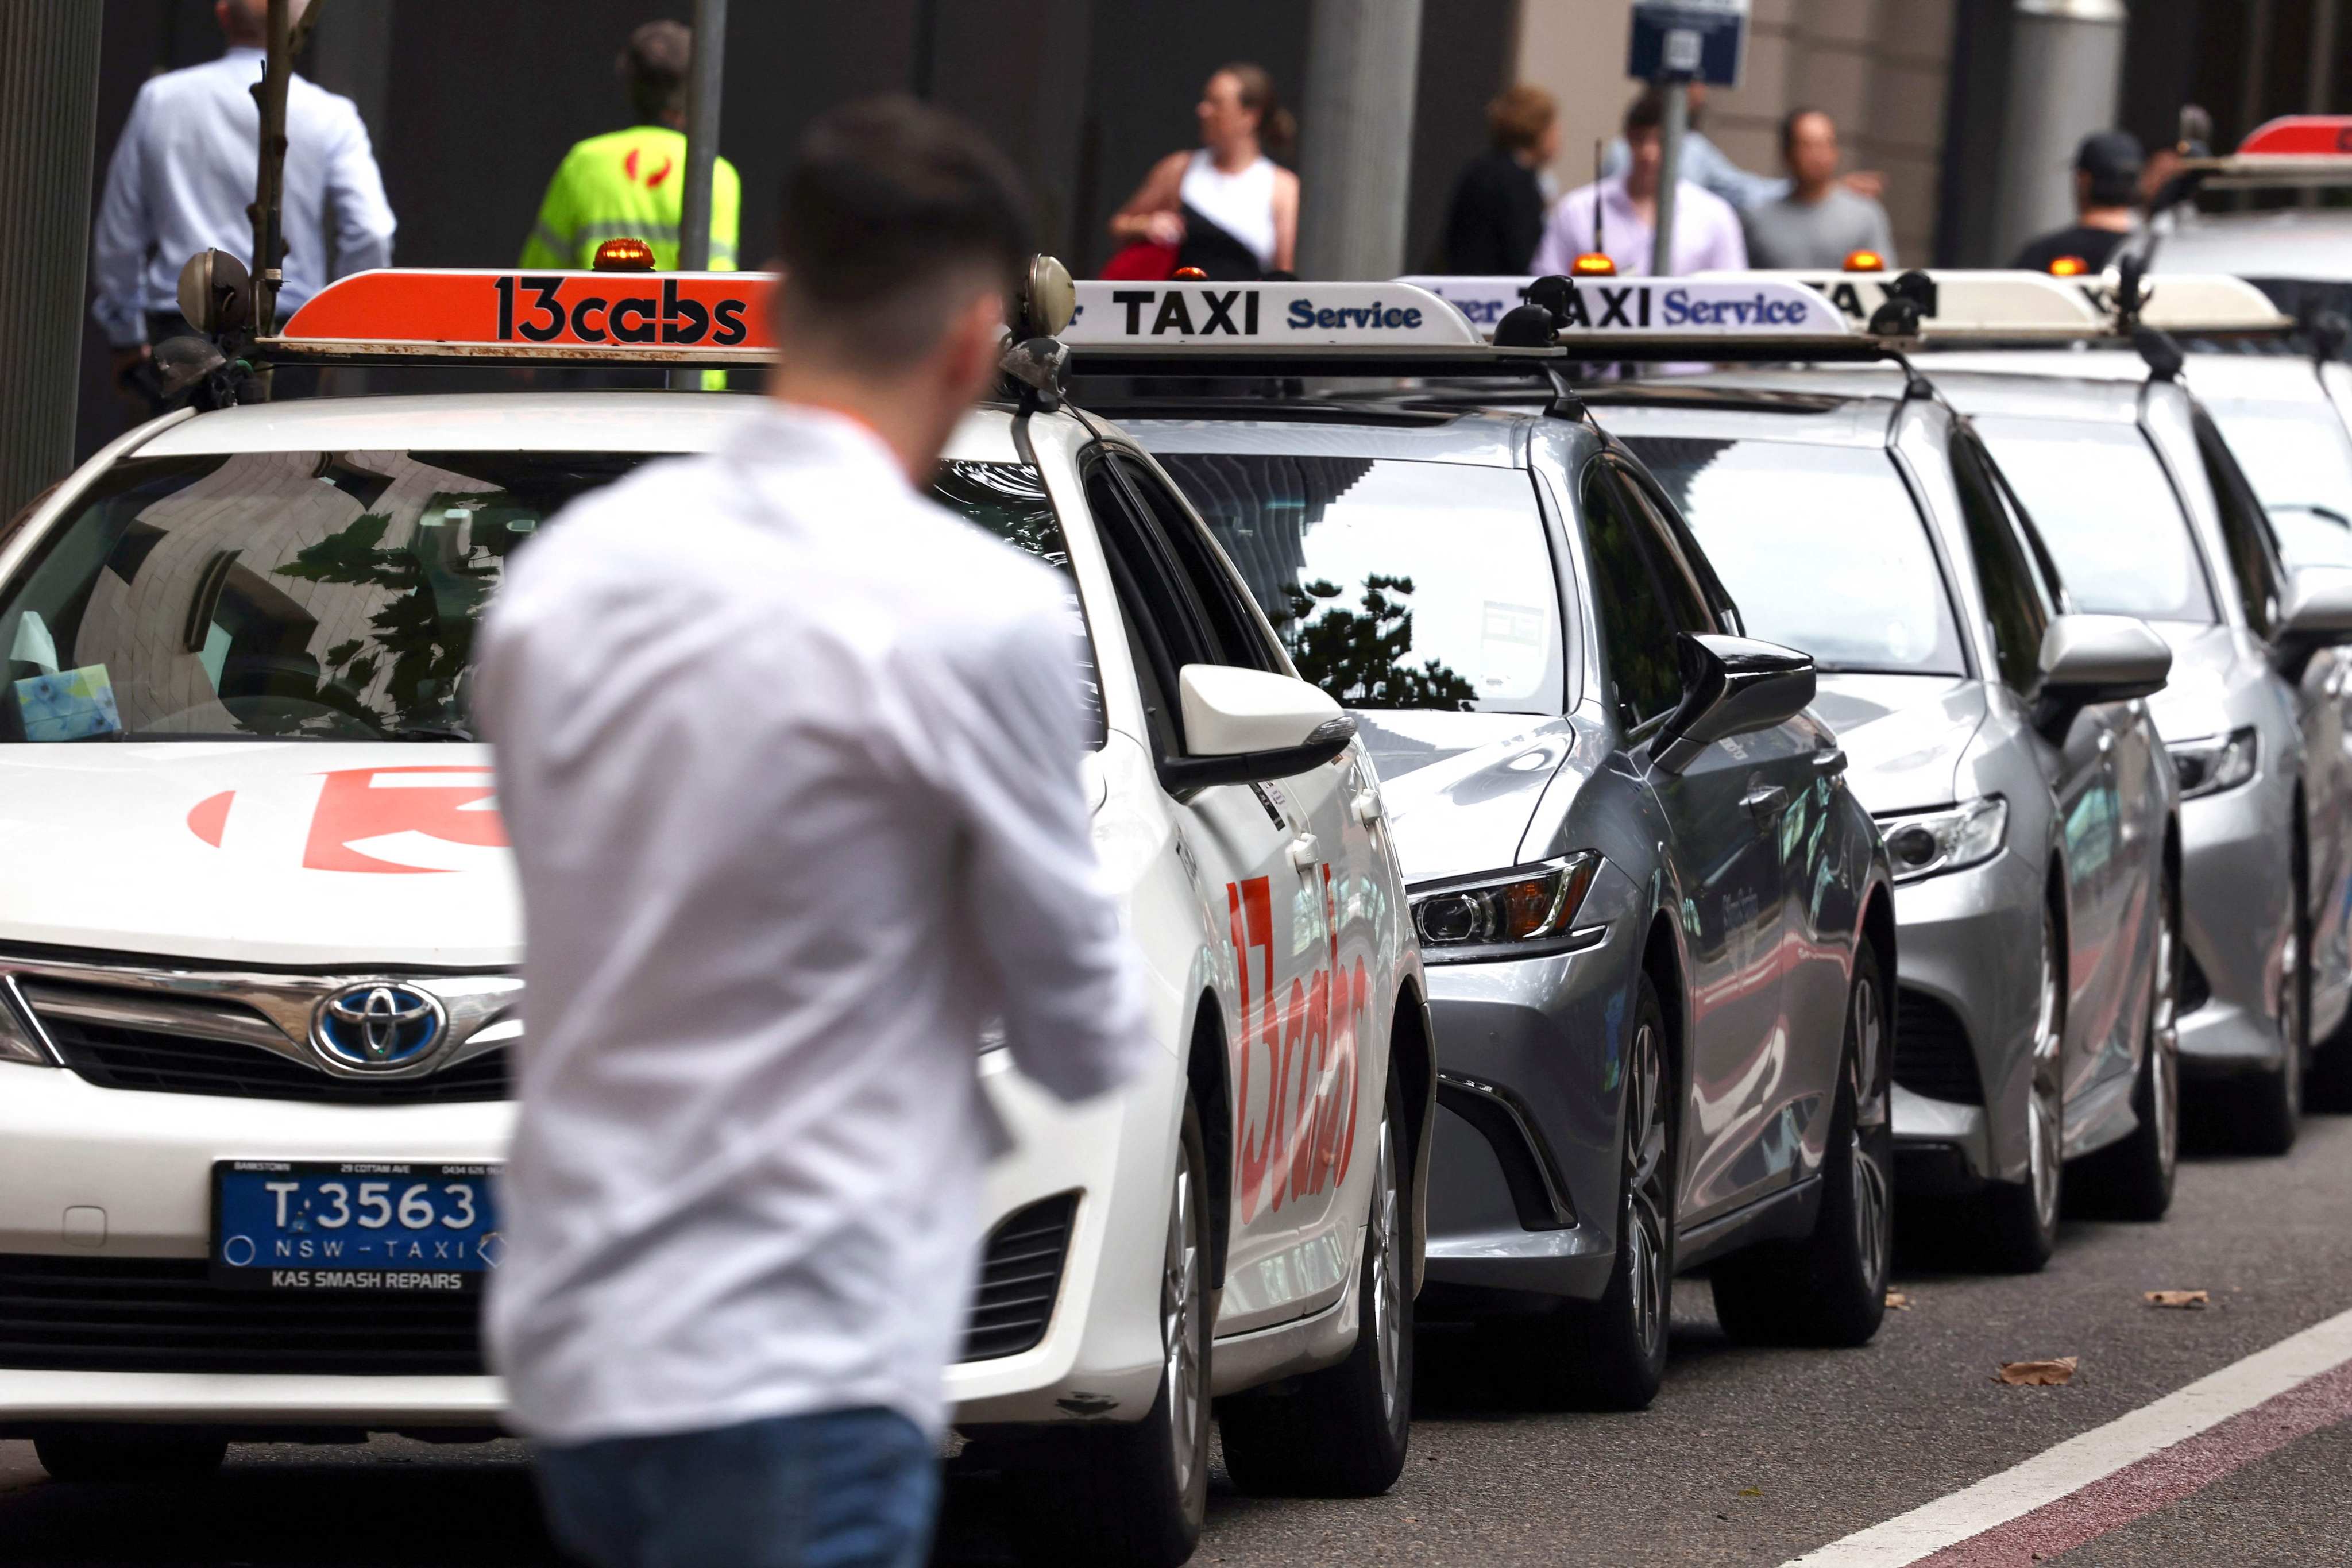 A pedestrian walks past a row of taxis in central Sydney on Monday. Uber entered Australia in 2012. Photo: AFP